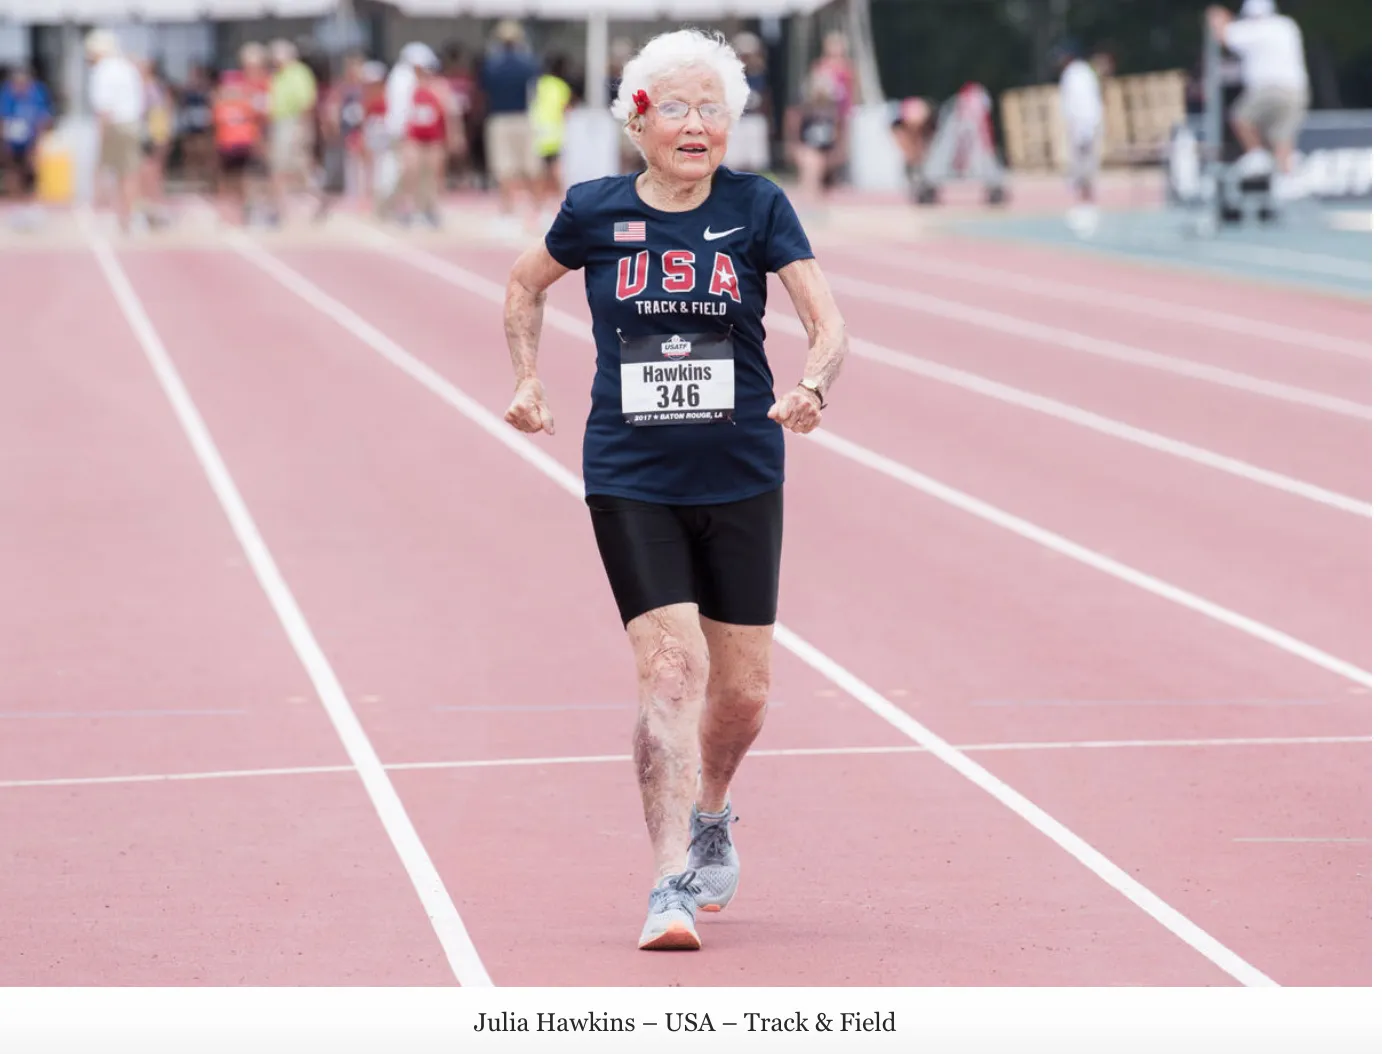 8 Amazing Lessons to Learn from a 101-Year-Old Runner